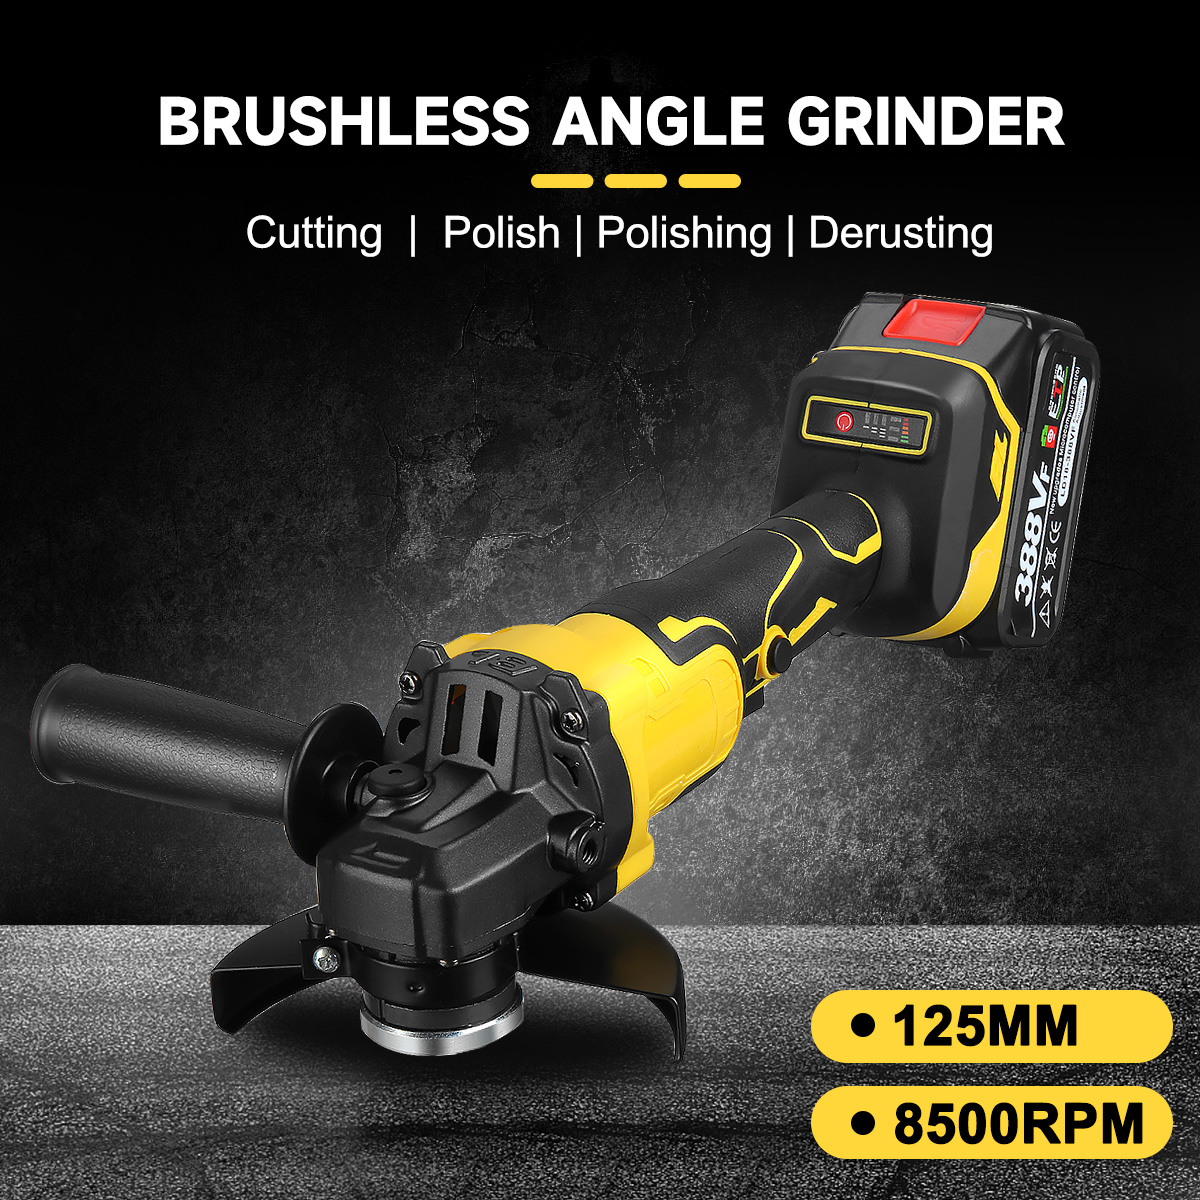 Drillpro-388VF-1280W-8500rpm-3-gears-125mm-Brushless-Lithium-Electric-Angle-Grinder-for-Makiita-18V--1962826-9